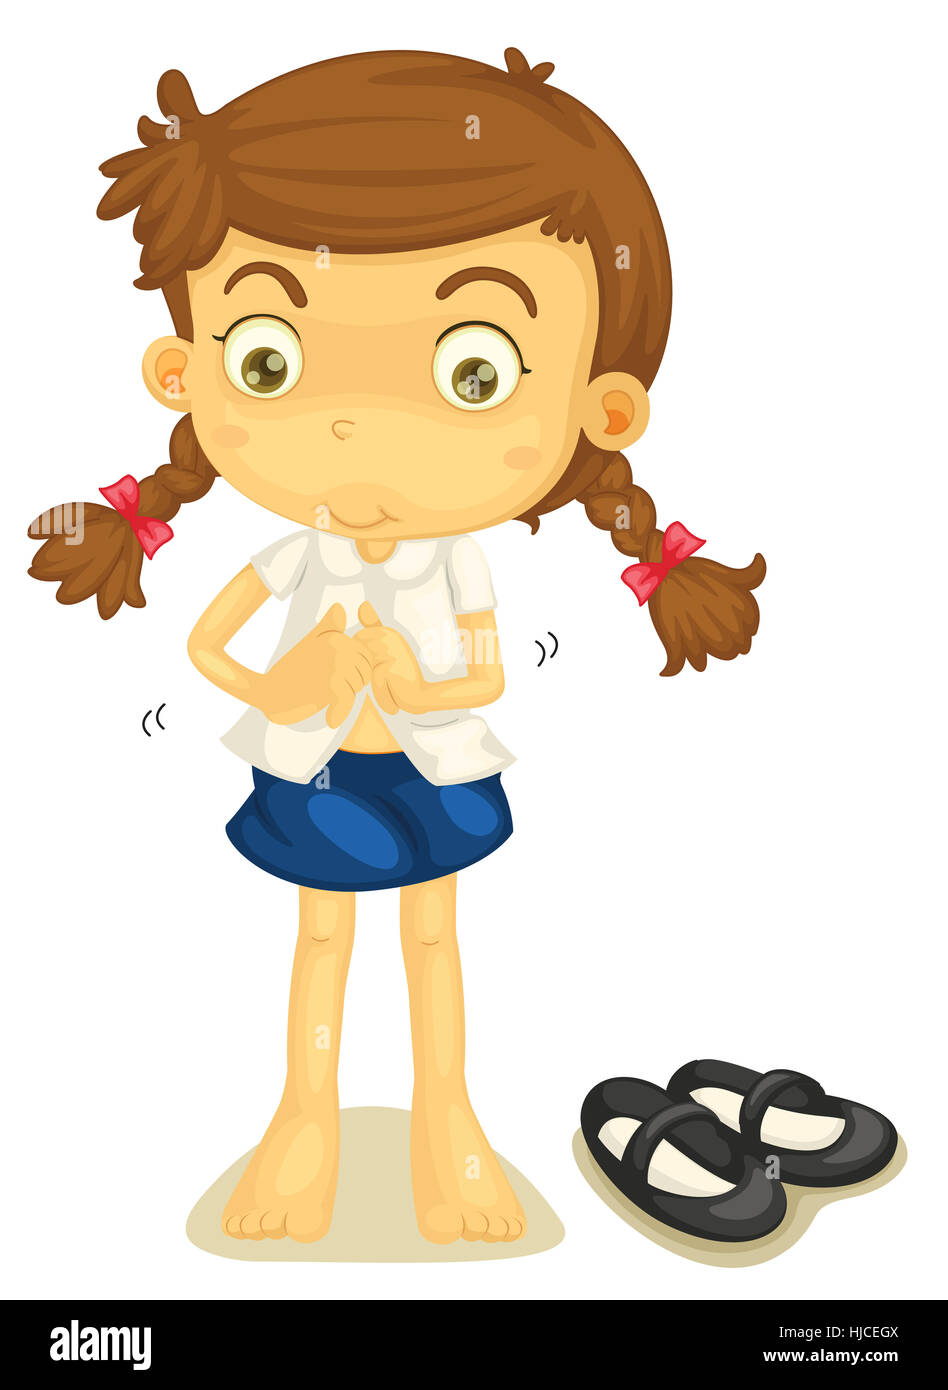 Illustration Of A Girl In School Uniform On A White Stock Photo Alamy